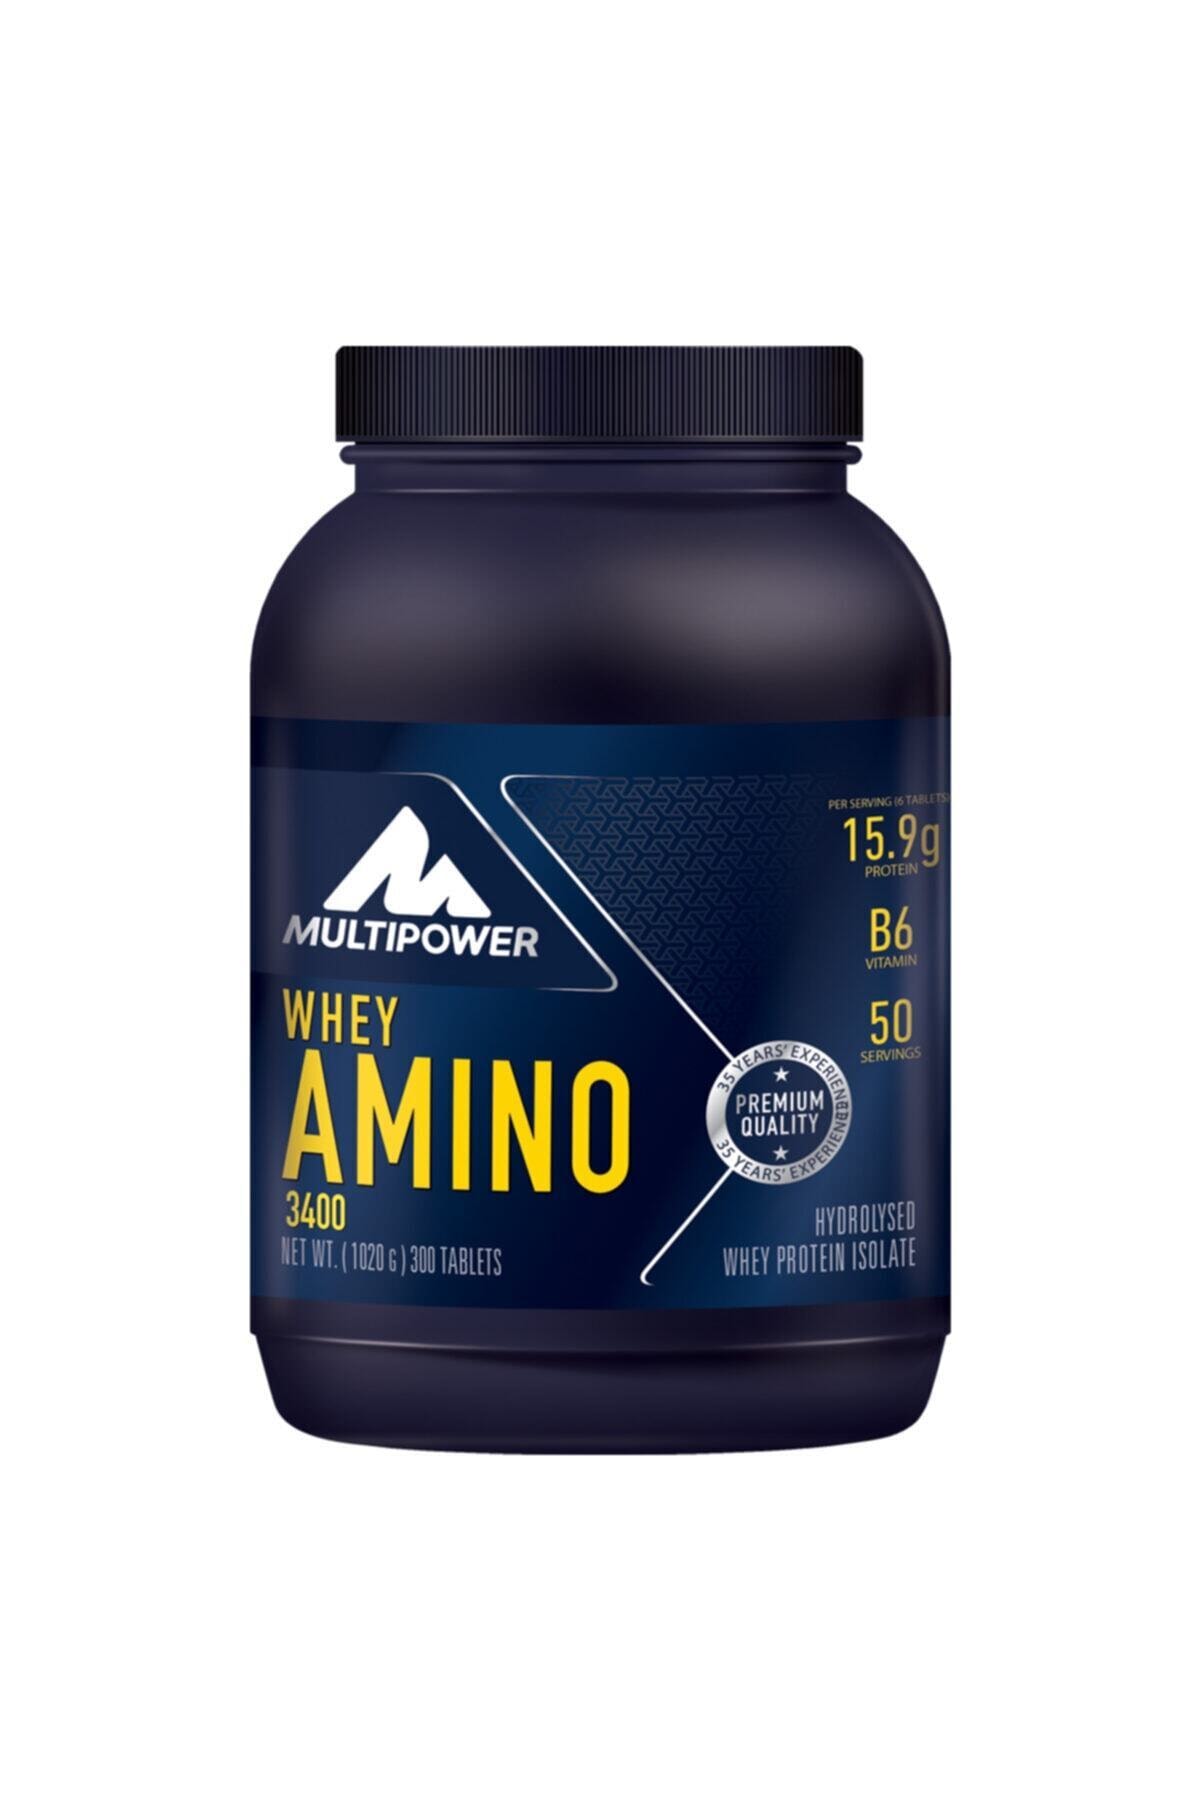 Multipower Whey Amino Asit 3400 300 Tablet 50 Servis Amino Asit